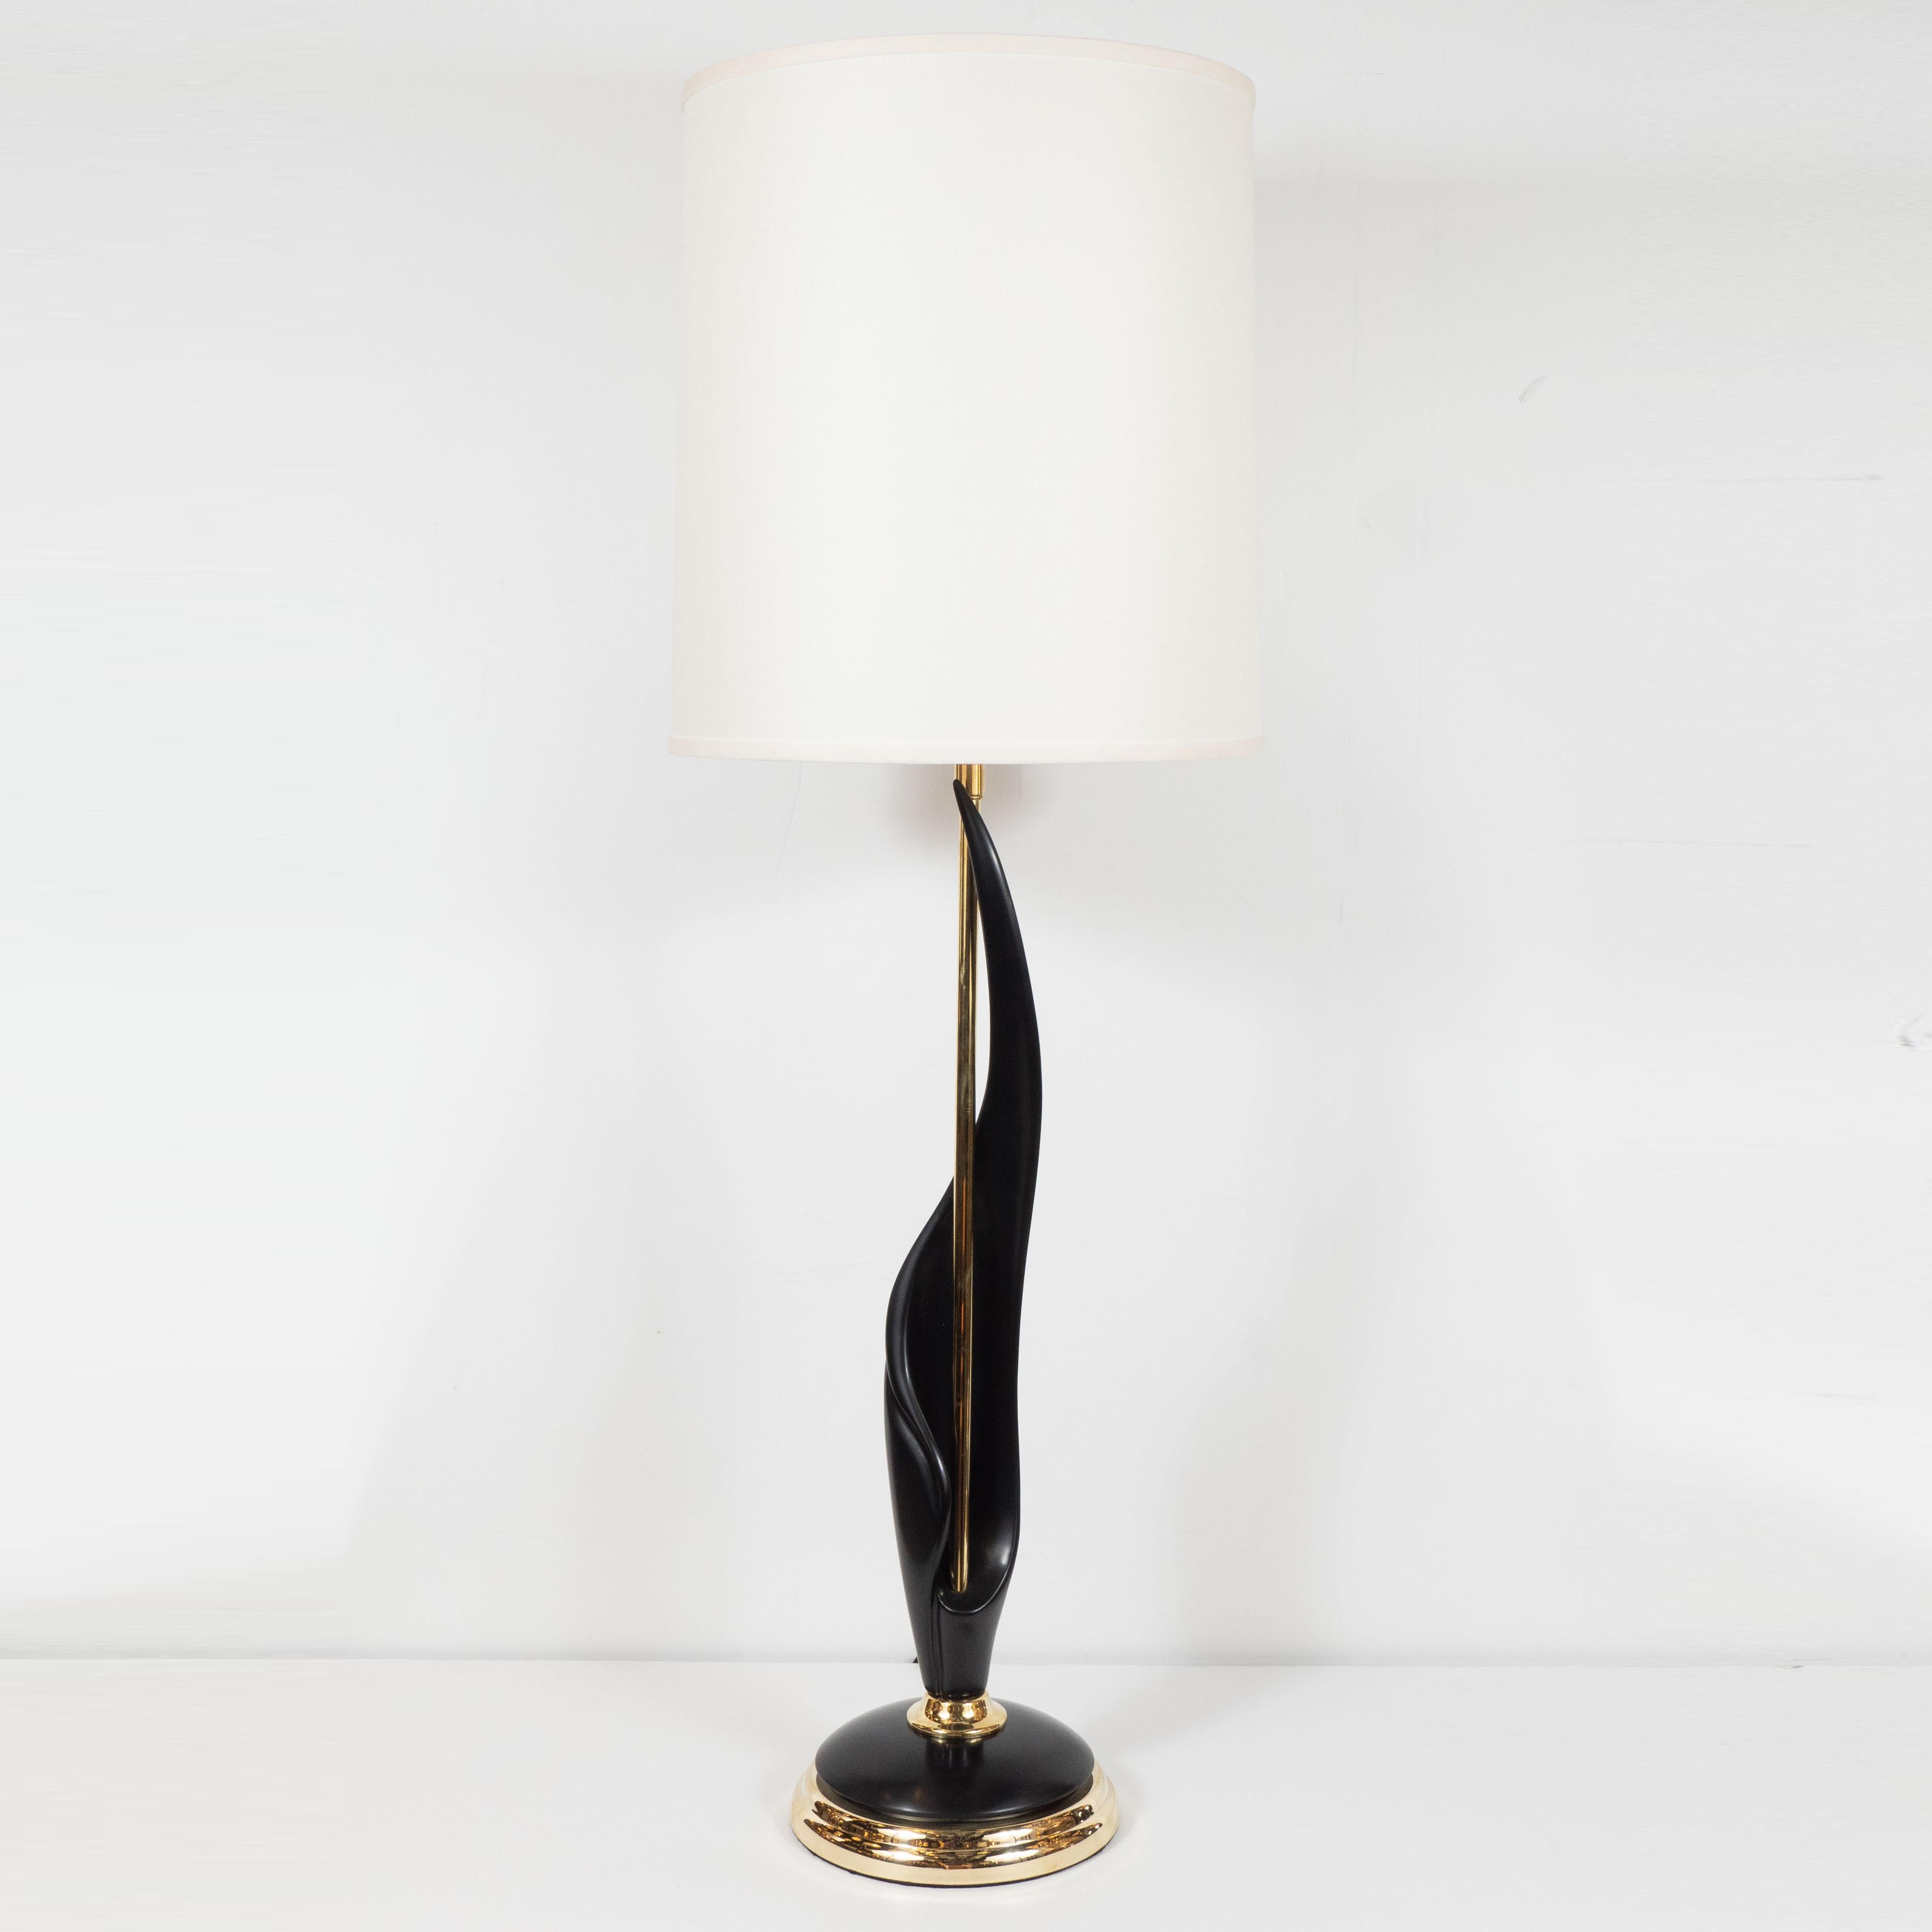 This elegant and dramatic pair of Mid-Century Modern table lamps was realized in the United States, circa 1970. They feature a domed base in alternating layers of lustrous brass and ebonized walnut from which a cylindrical brass rod ascends. A